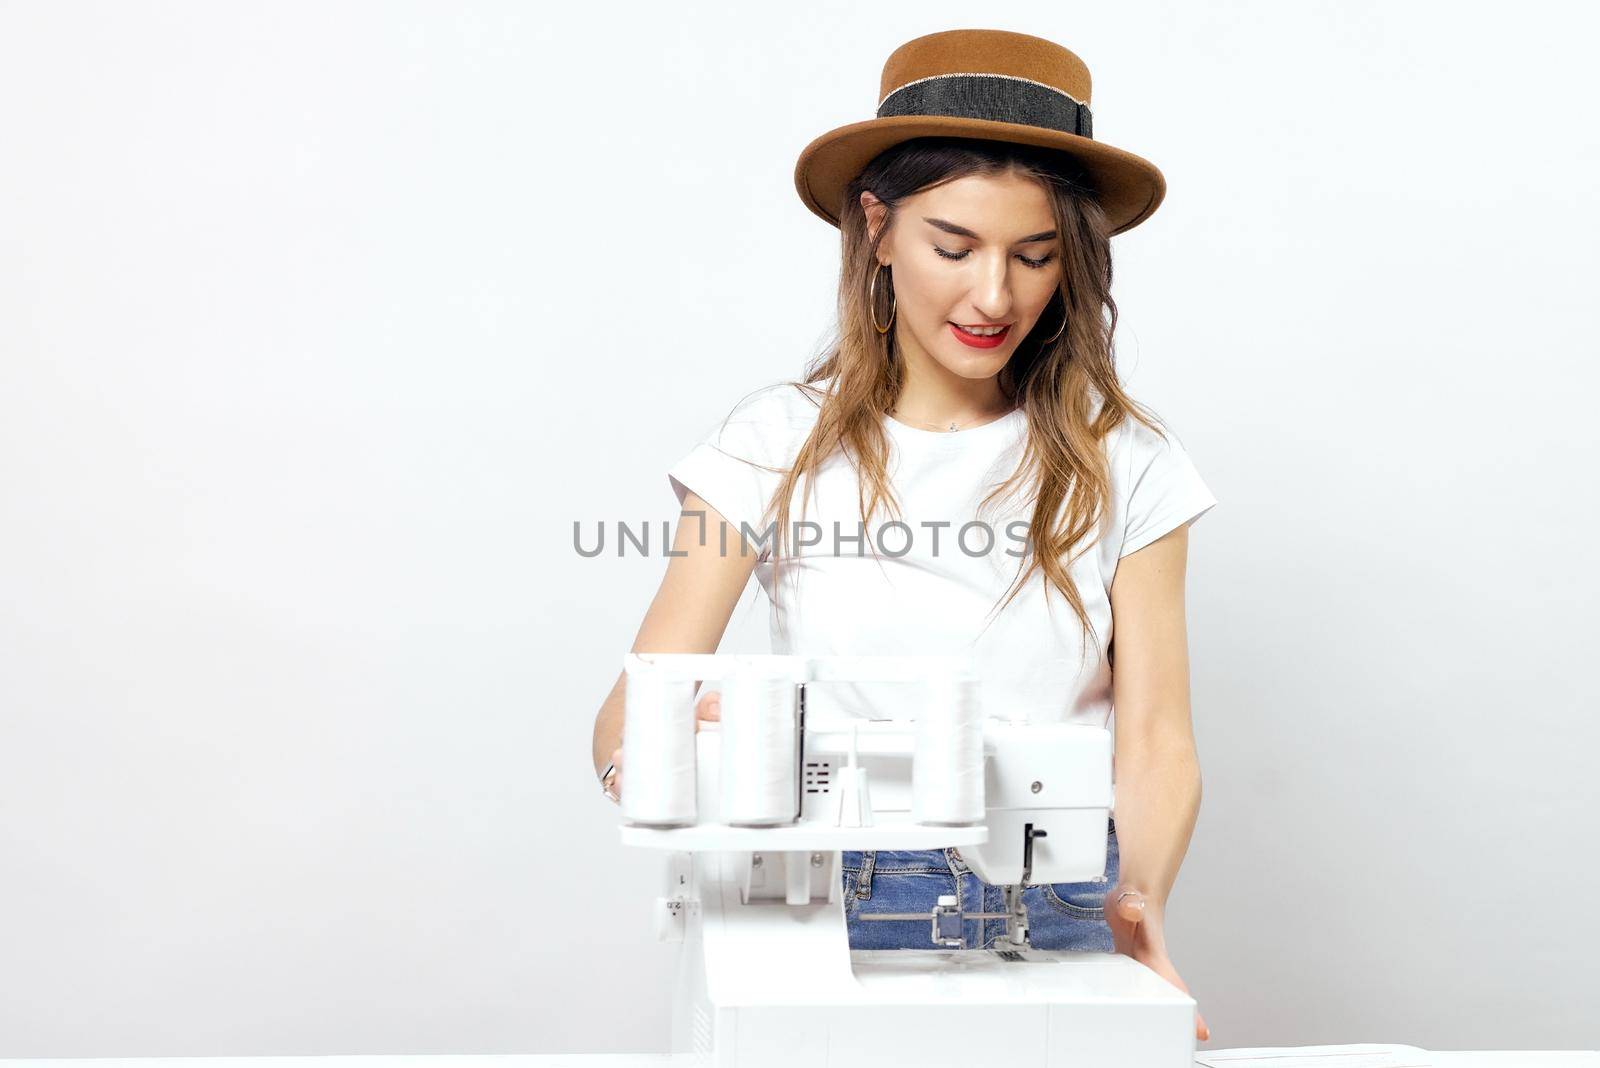 Smiling Girl with sewing machine poses for photo High quality photo